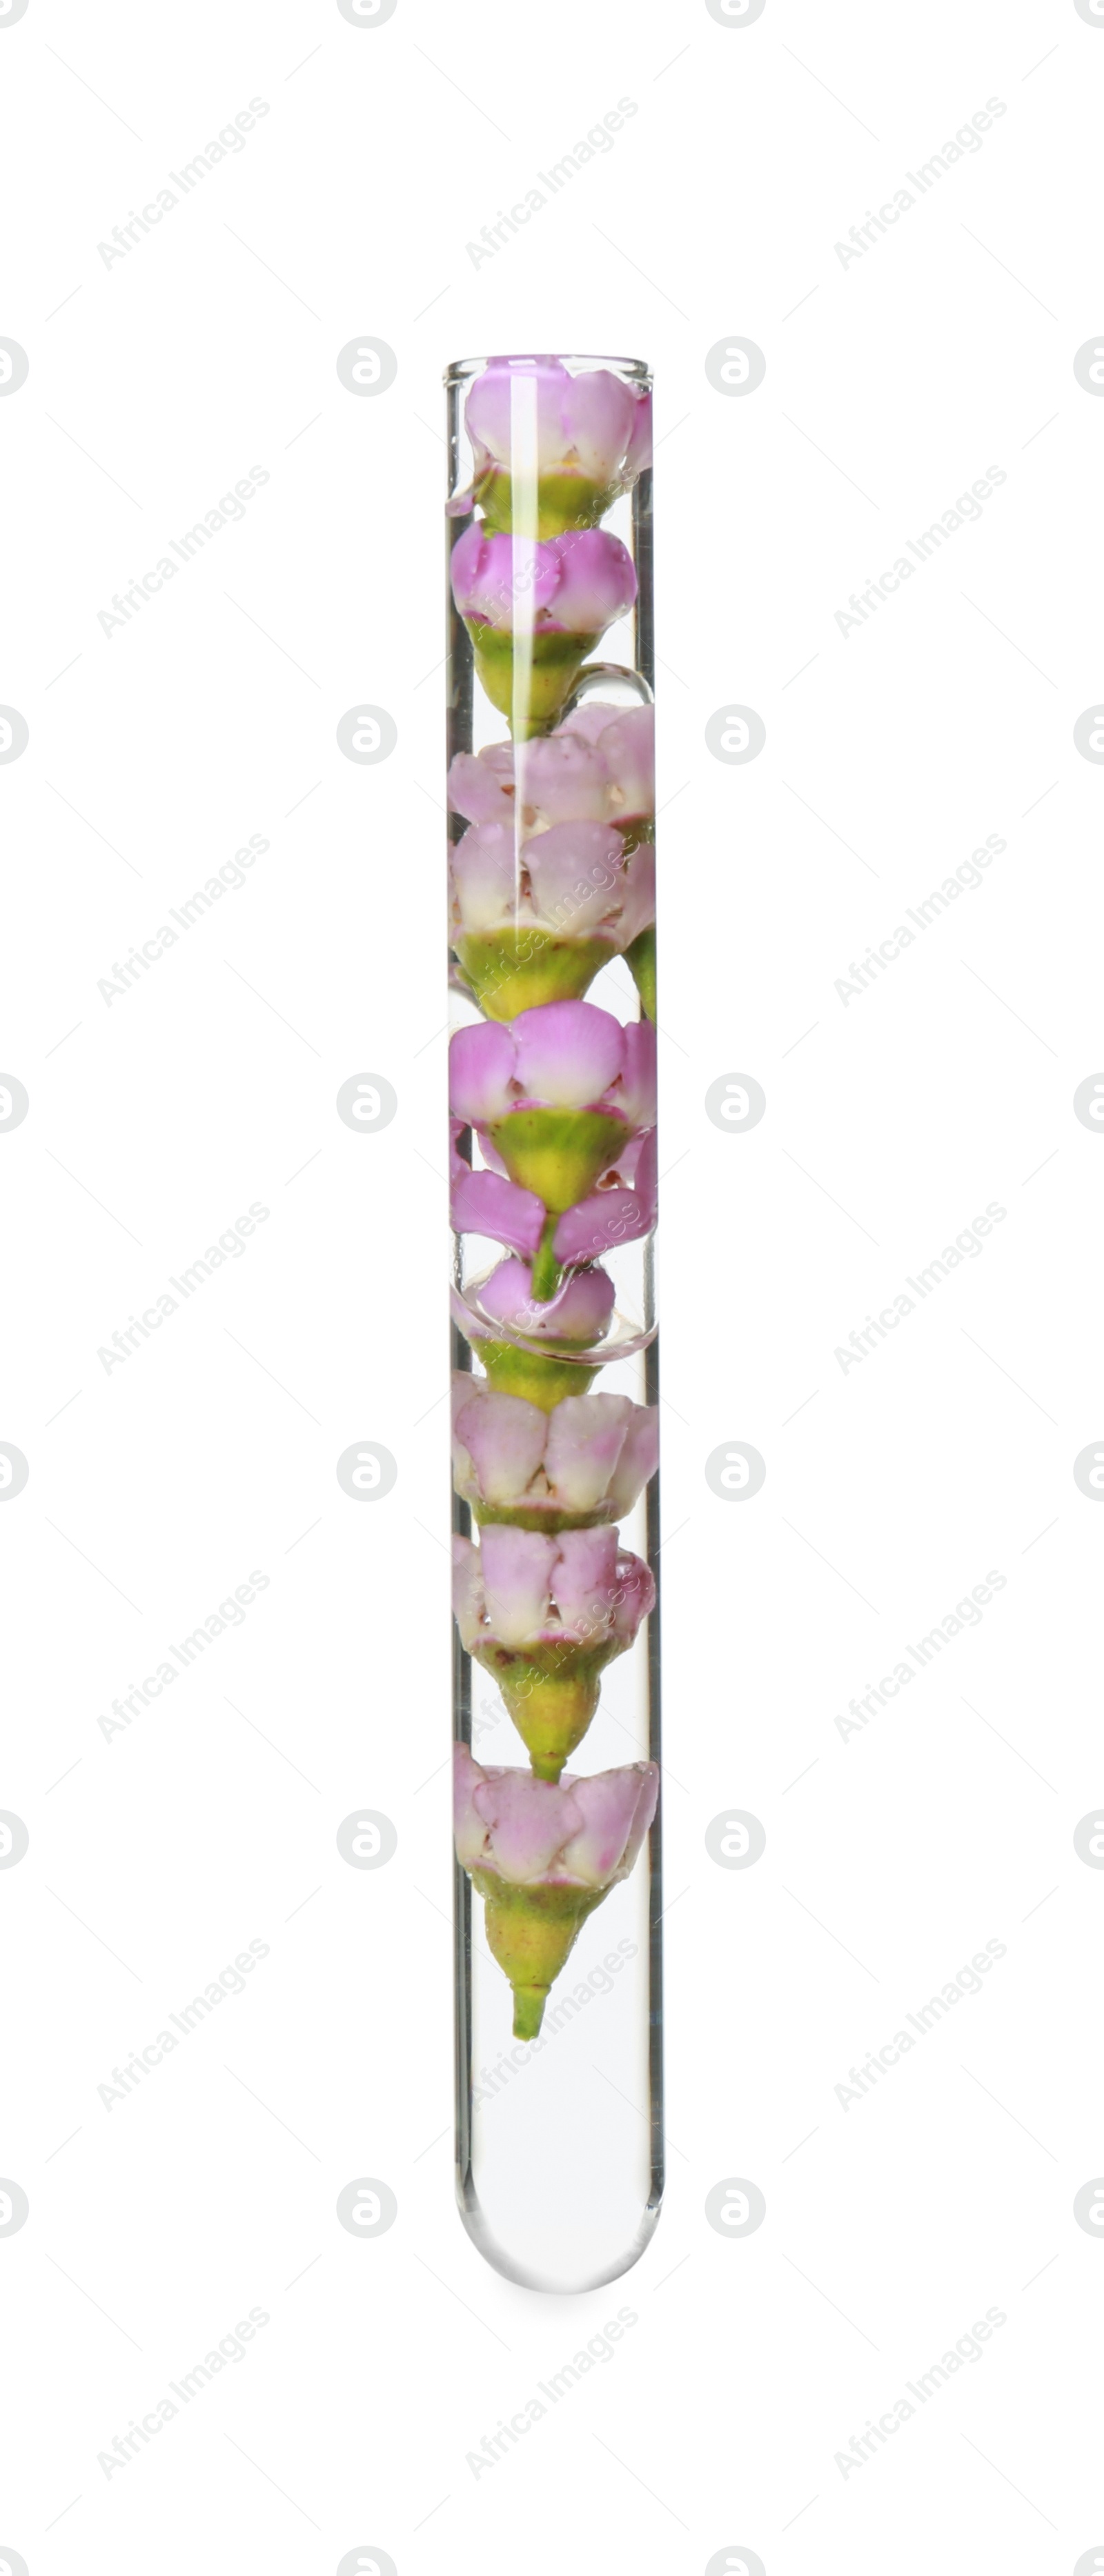 Photo of Flowers in test tube on white background